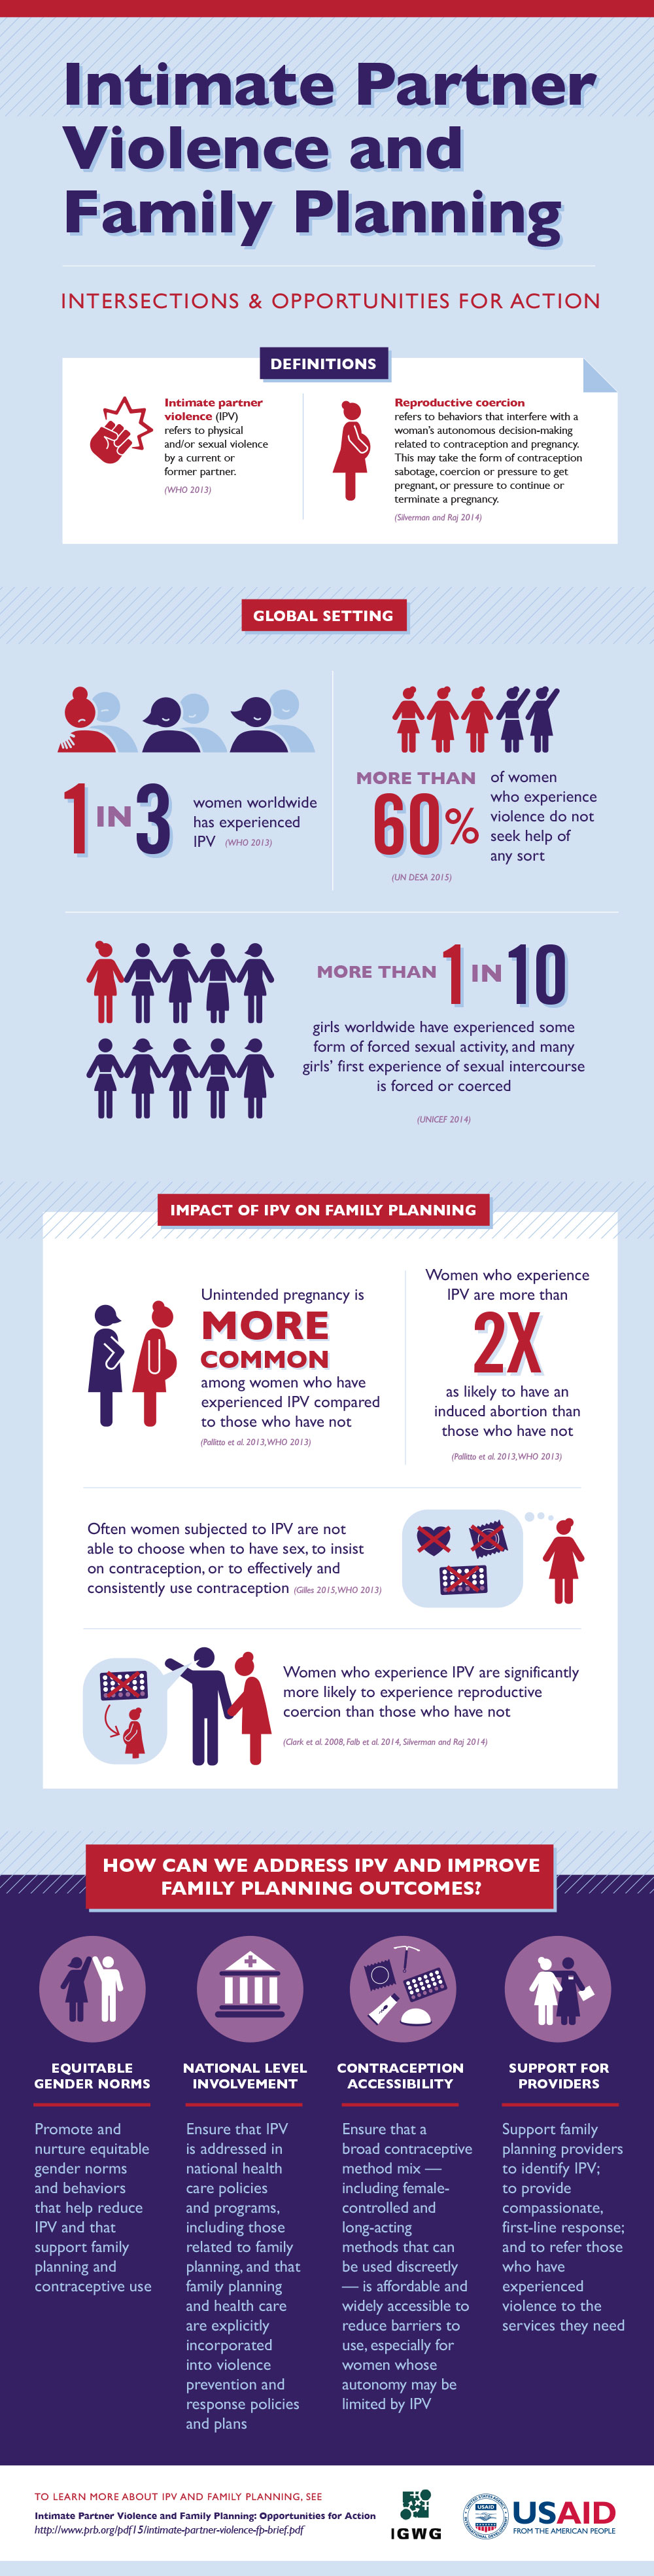 Infographic talking about intimate Partner violence and family planning. Please see PDF below for full description